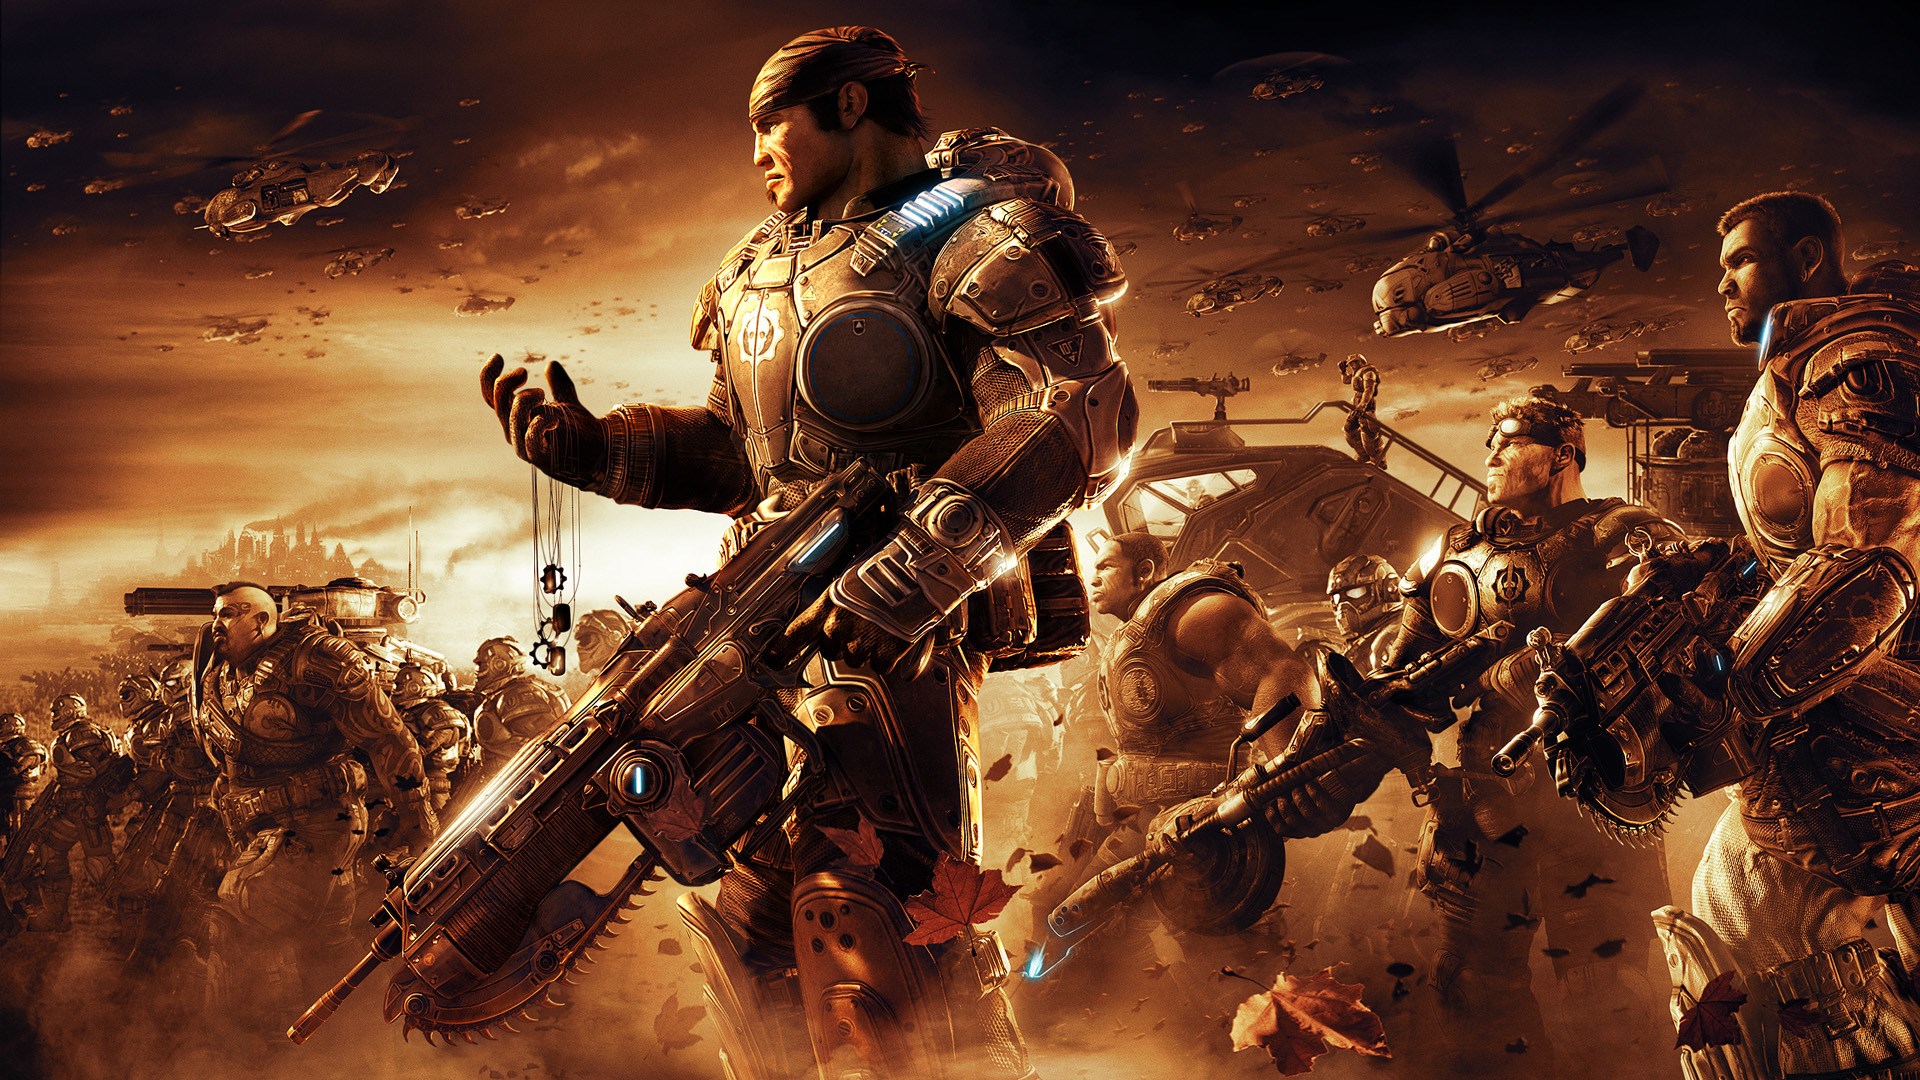 Gears of War Characters - Giant Bomb